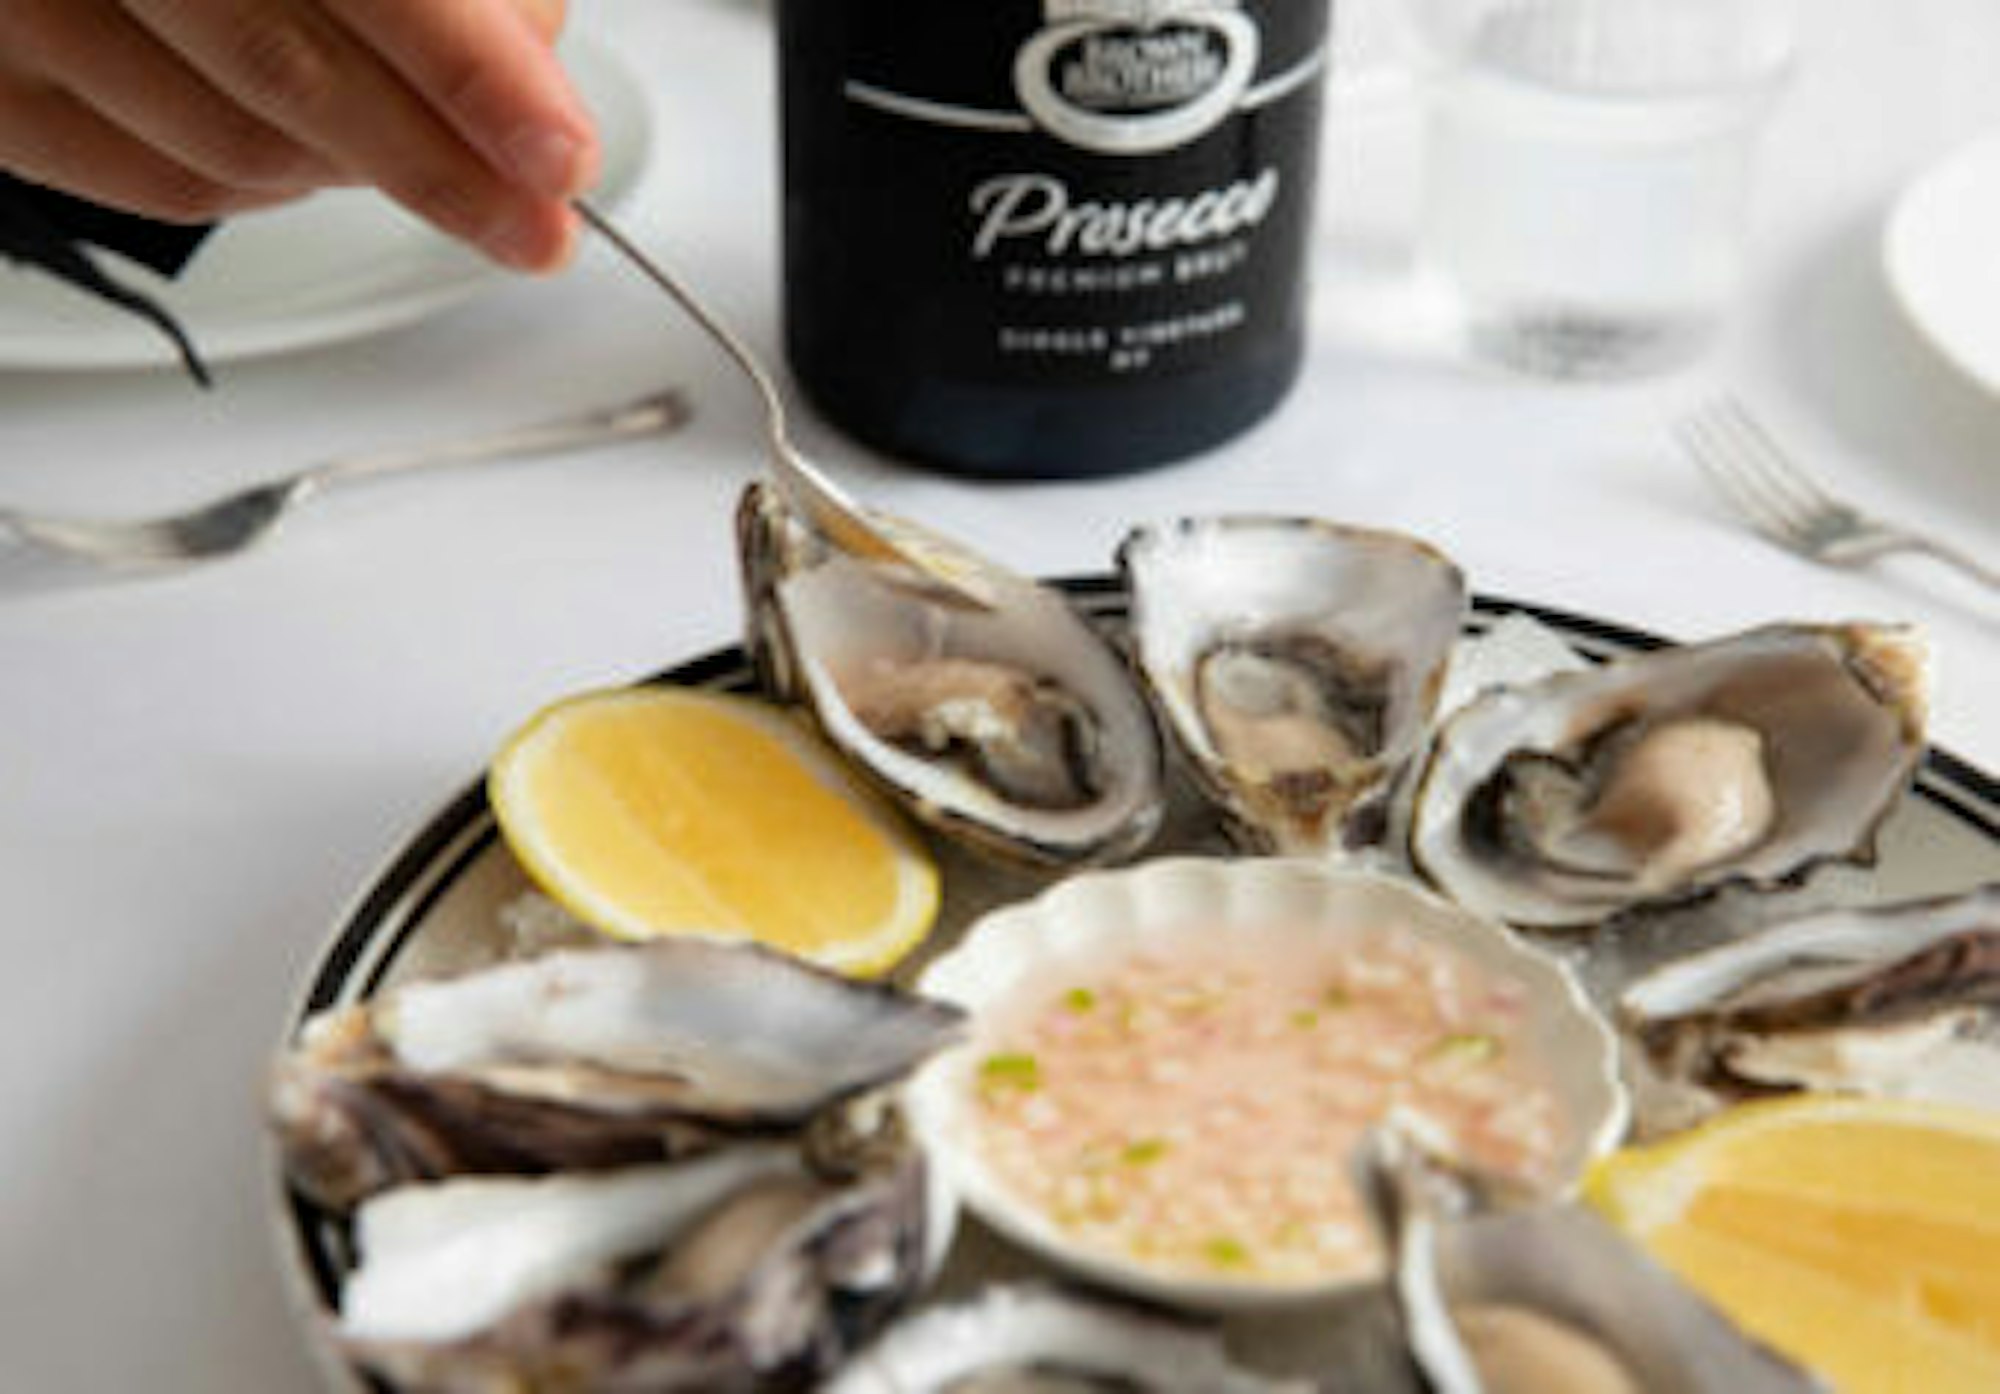 Plate of fresh oysters with a bottle of Brown Brothers Prosecco Premium Brut 